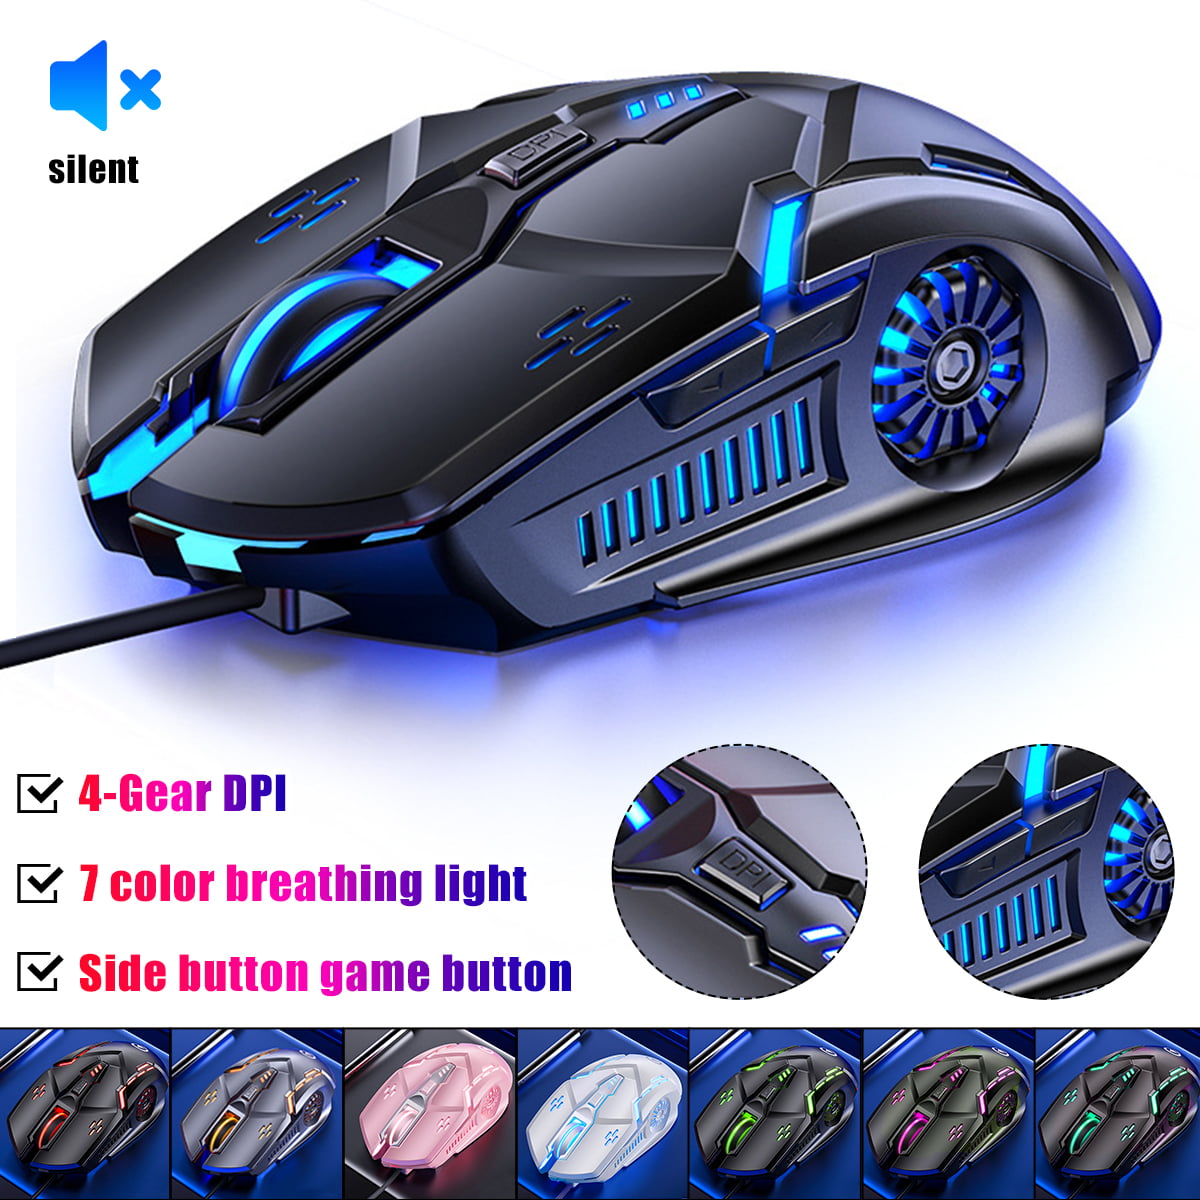 New Wired Gaming Mouse 3200DPI LED USB Computer Mouse Gamer Silent Optical Mice with Backlight Mouse